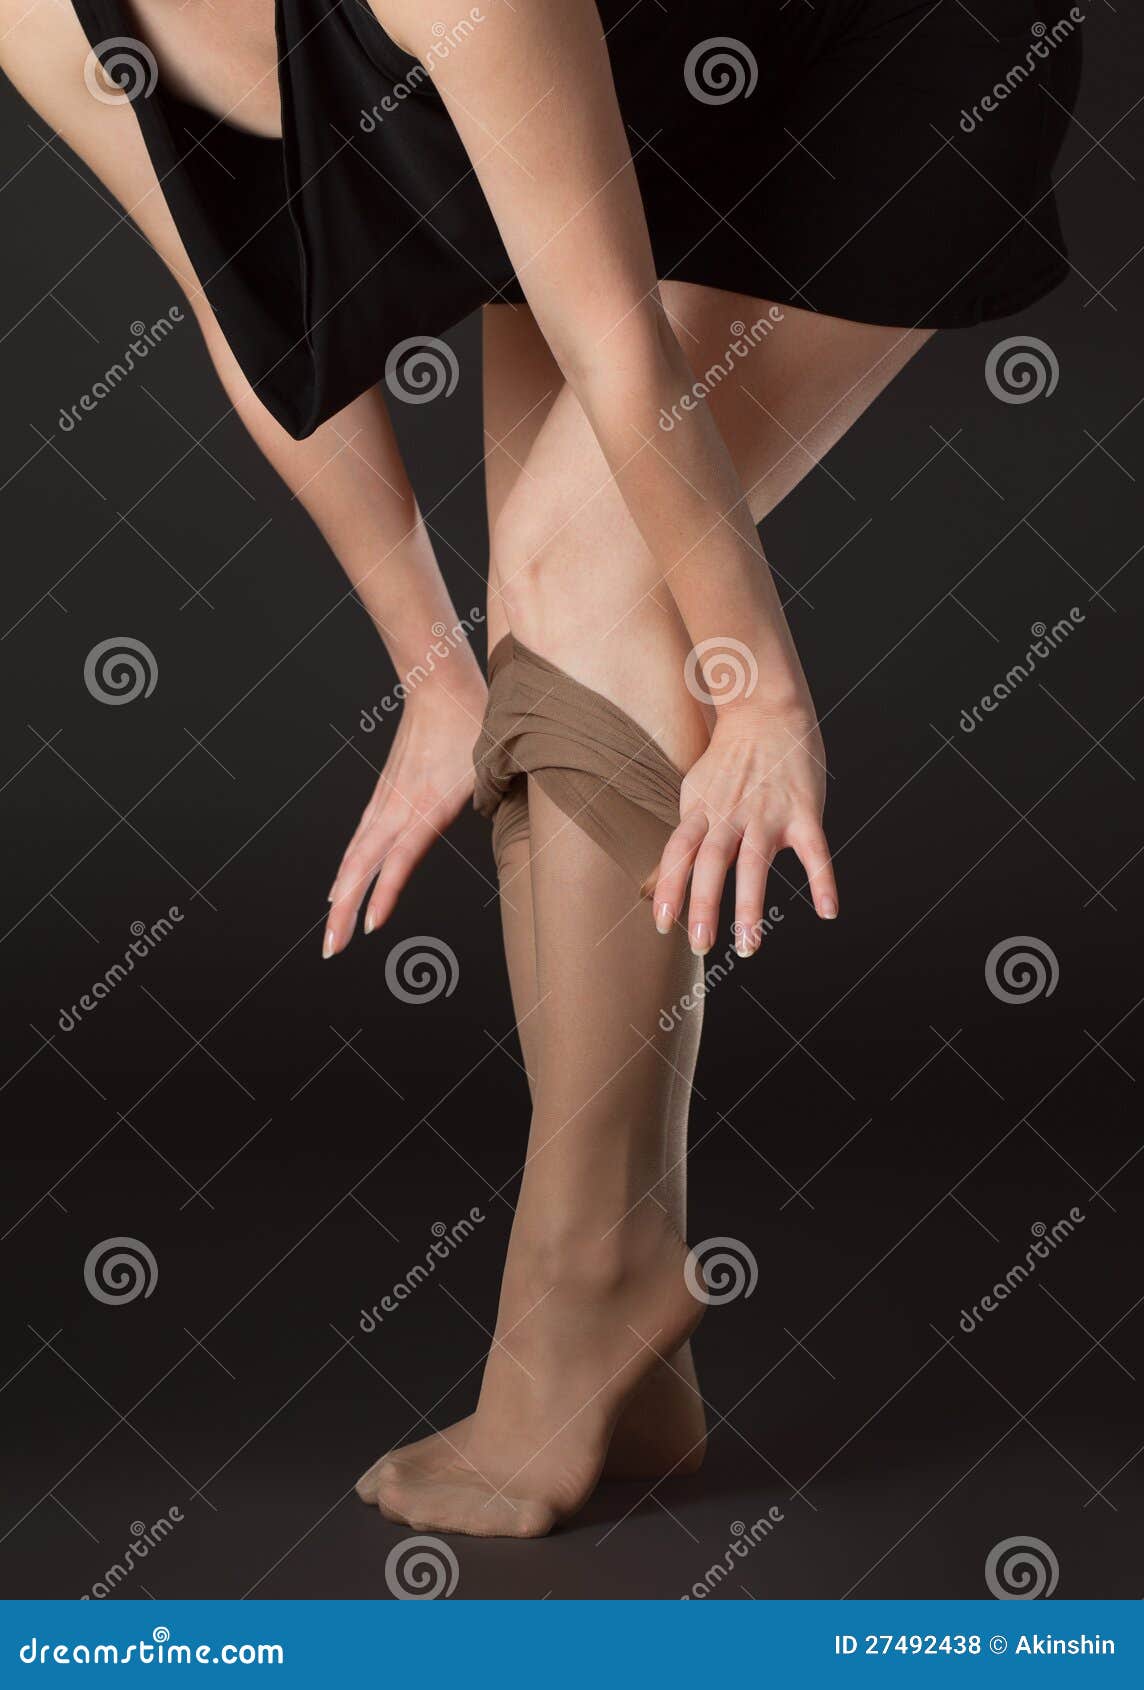 Woman takes off stockings on a black background.